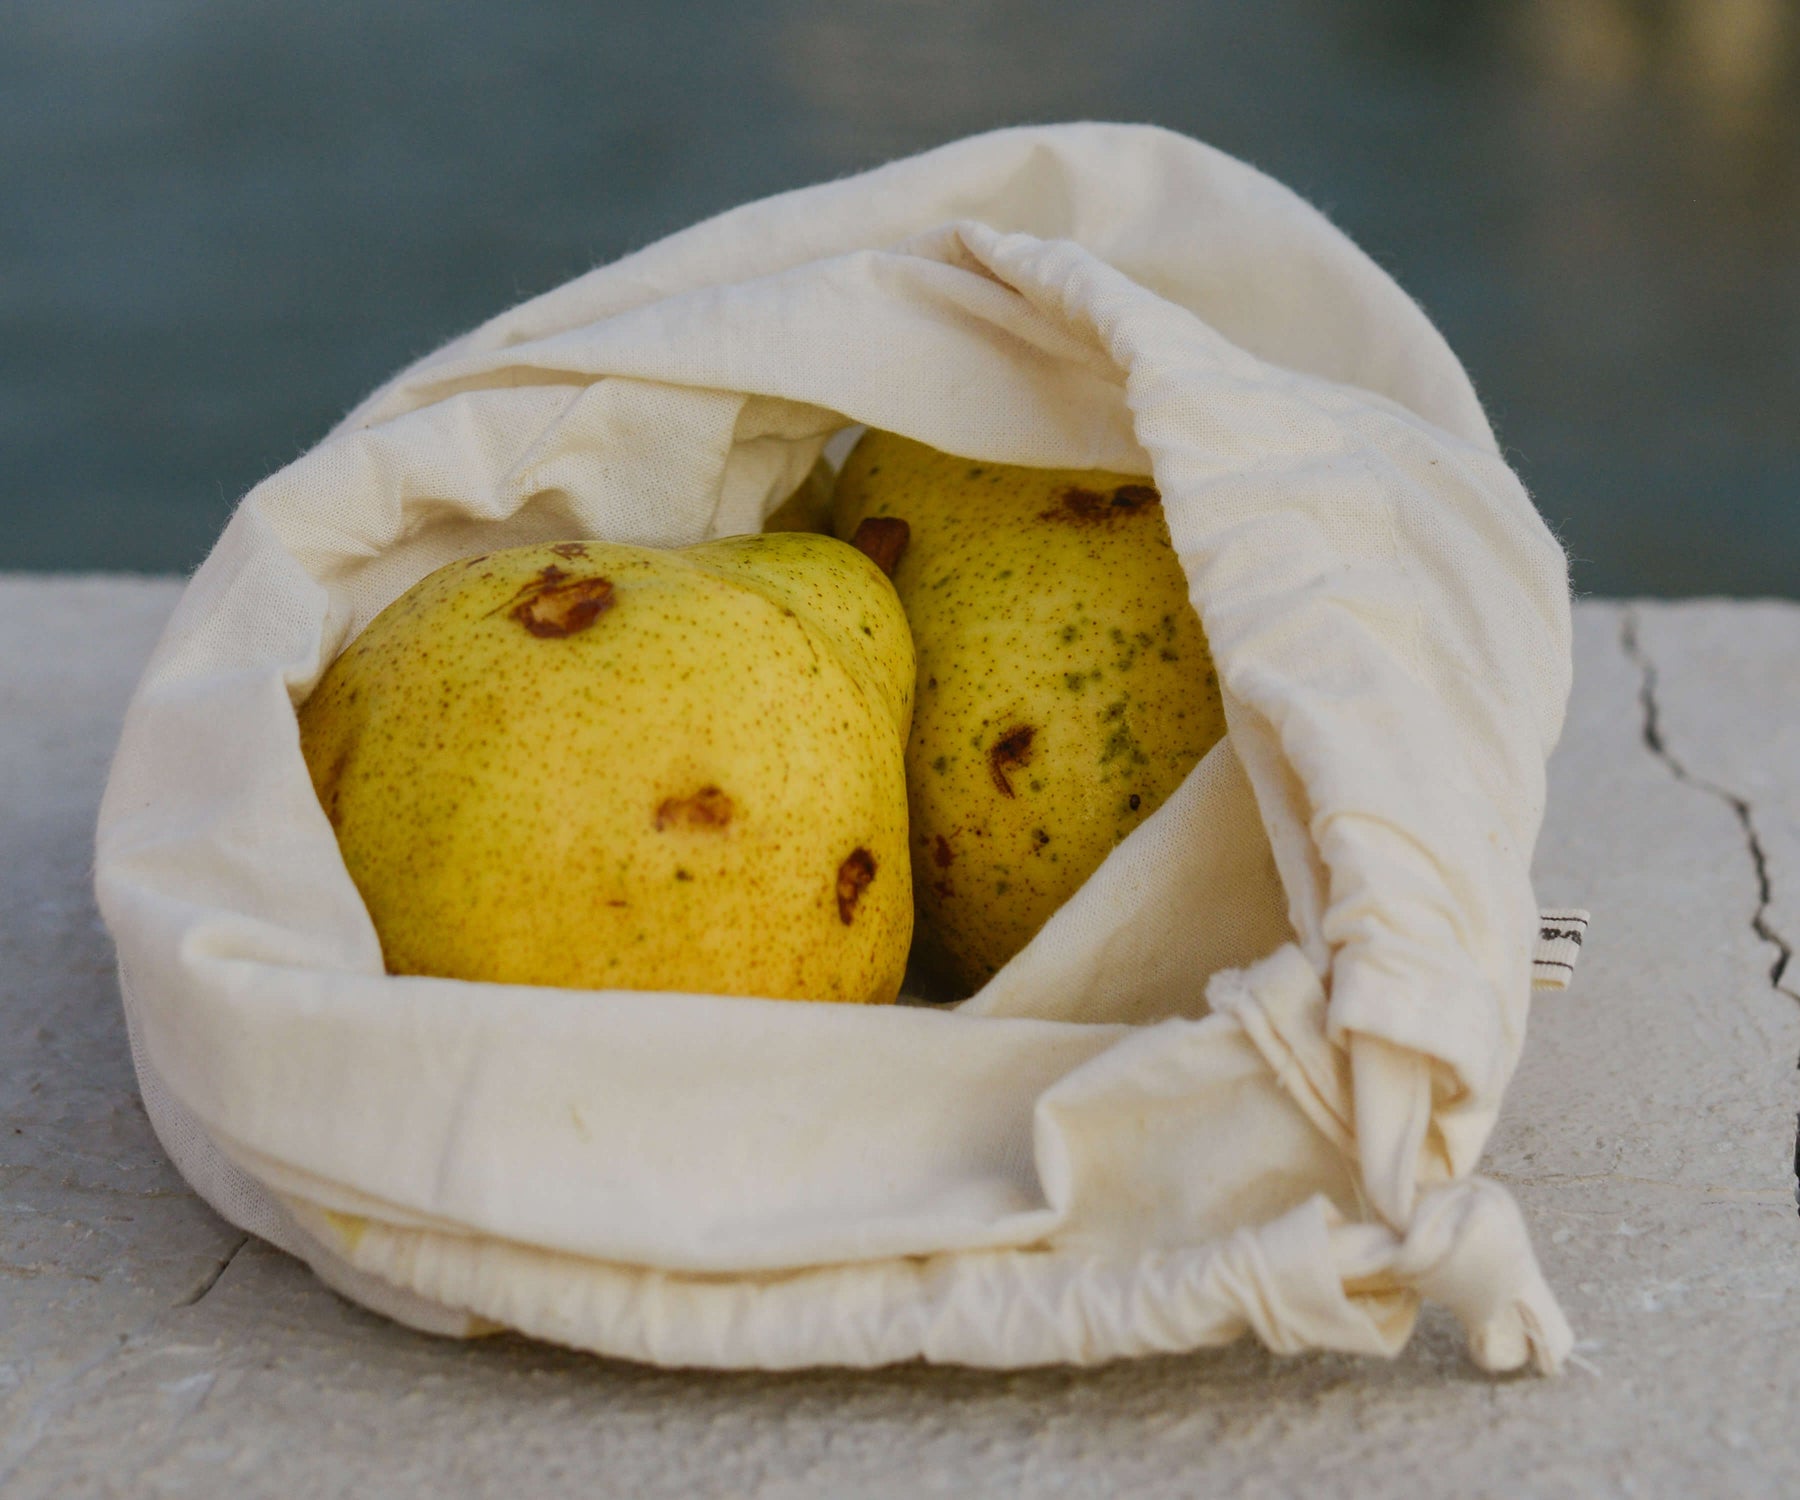 Embrace sustainability with muslin bags, bulk muslin bags, cloth produce bags, wholesale muslin bags, and organic cotton tote bags, ensuring eco-friendly packaging choices that align with responsible practices.